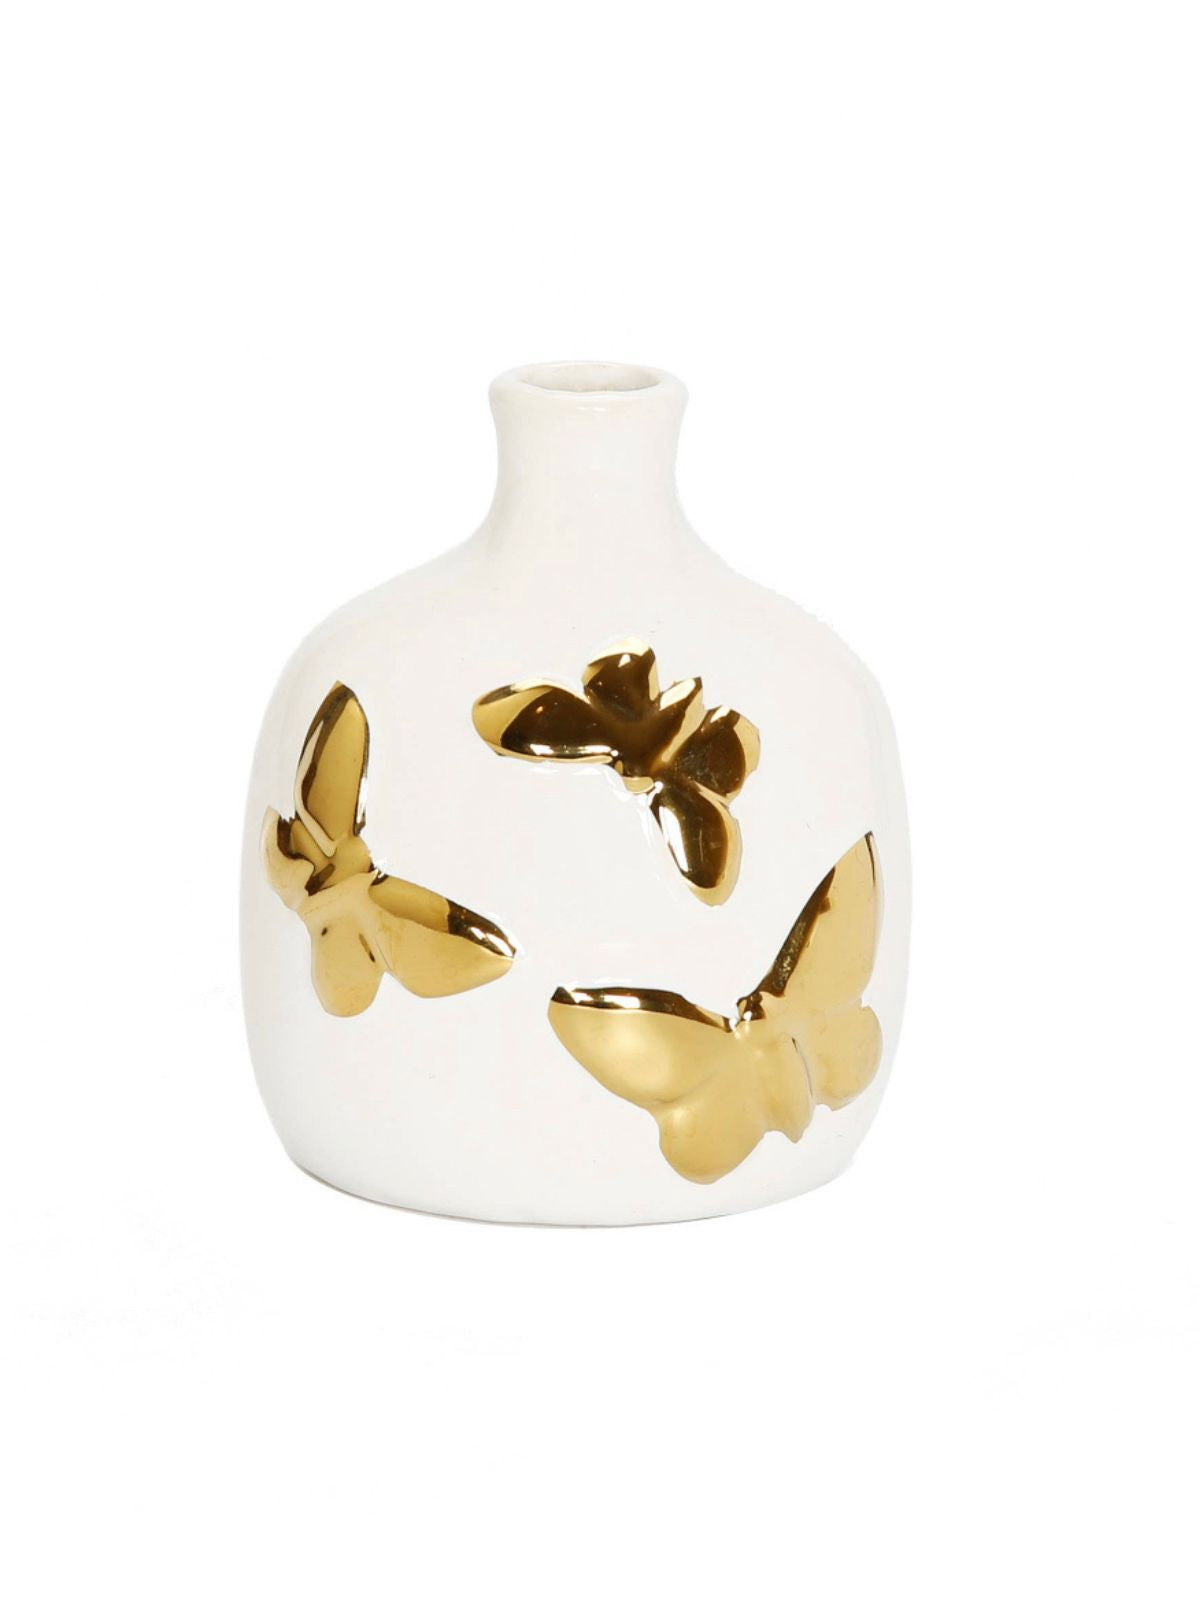 Luxury White Ceramic Reed Diffuser with Gold Butterflies Design and fresh floral fragrance sold by KYA Home Decor.